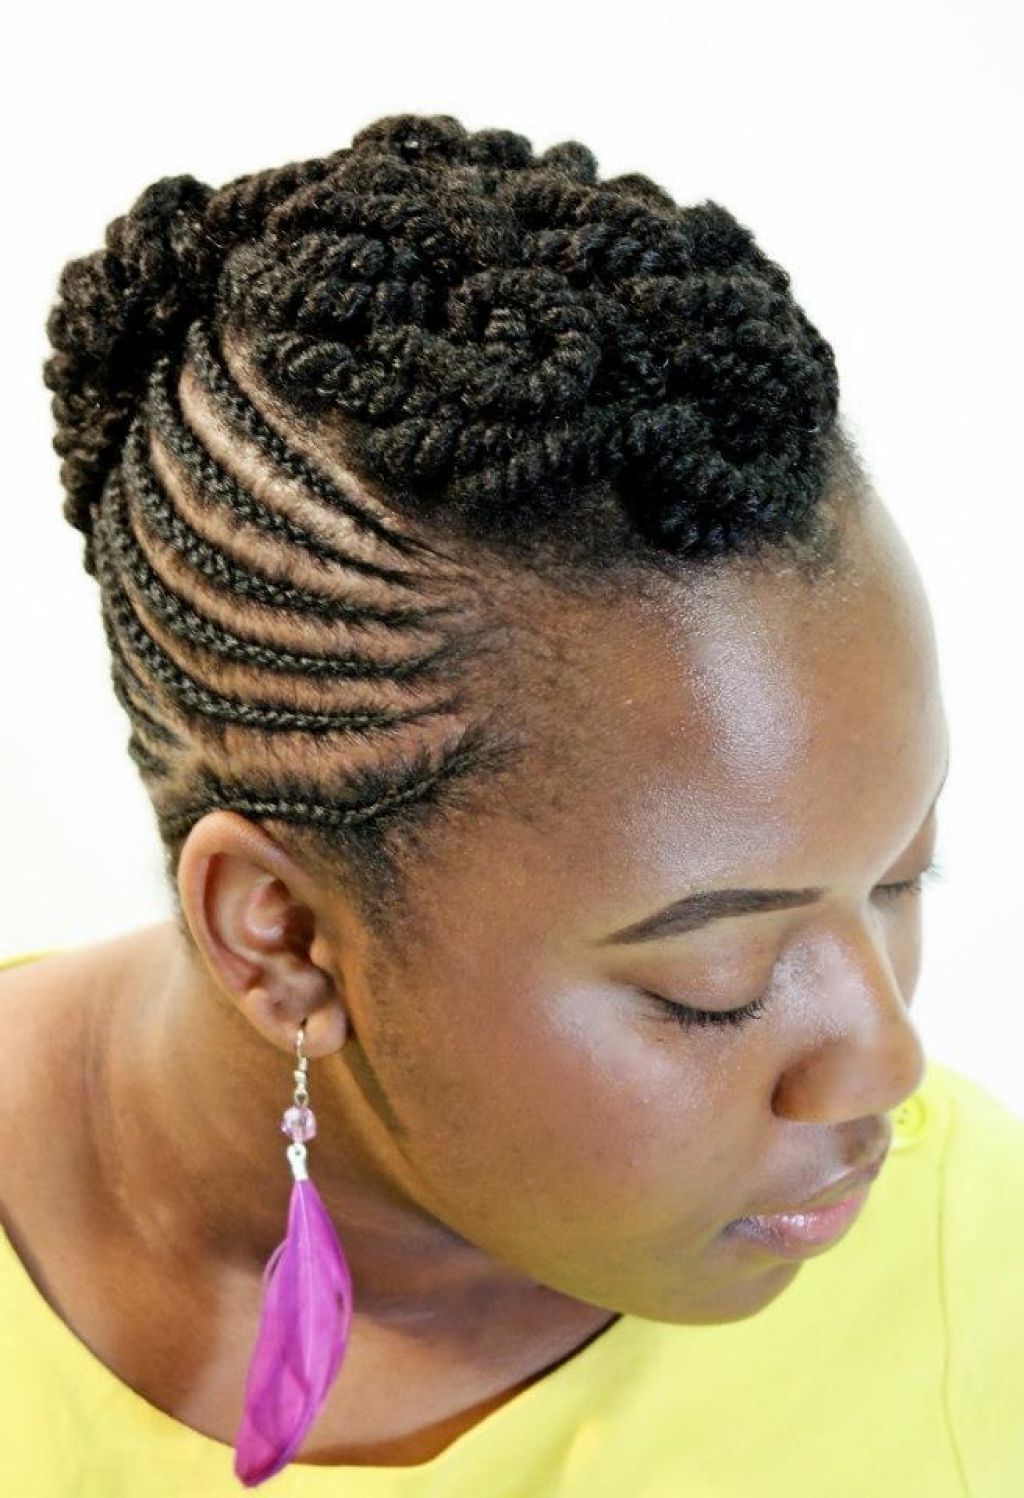 Braided And Two Strand Twist Updo Hairstyle Ideas | Natural Braided Within Two Strand Twist Updo Hairstyles For Natural Hair (View 11 of 15)